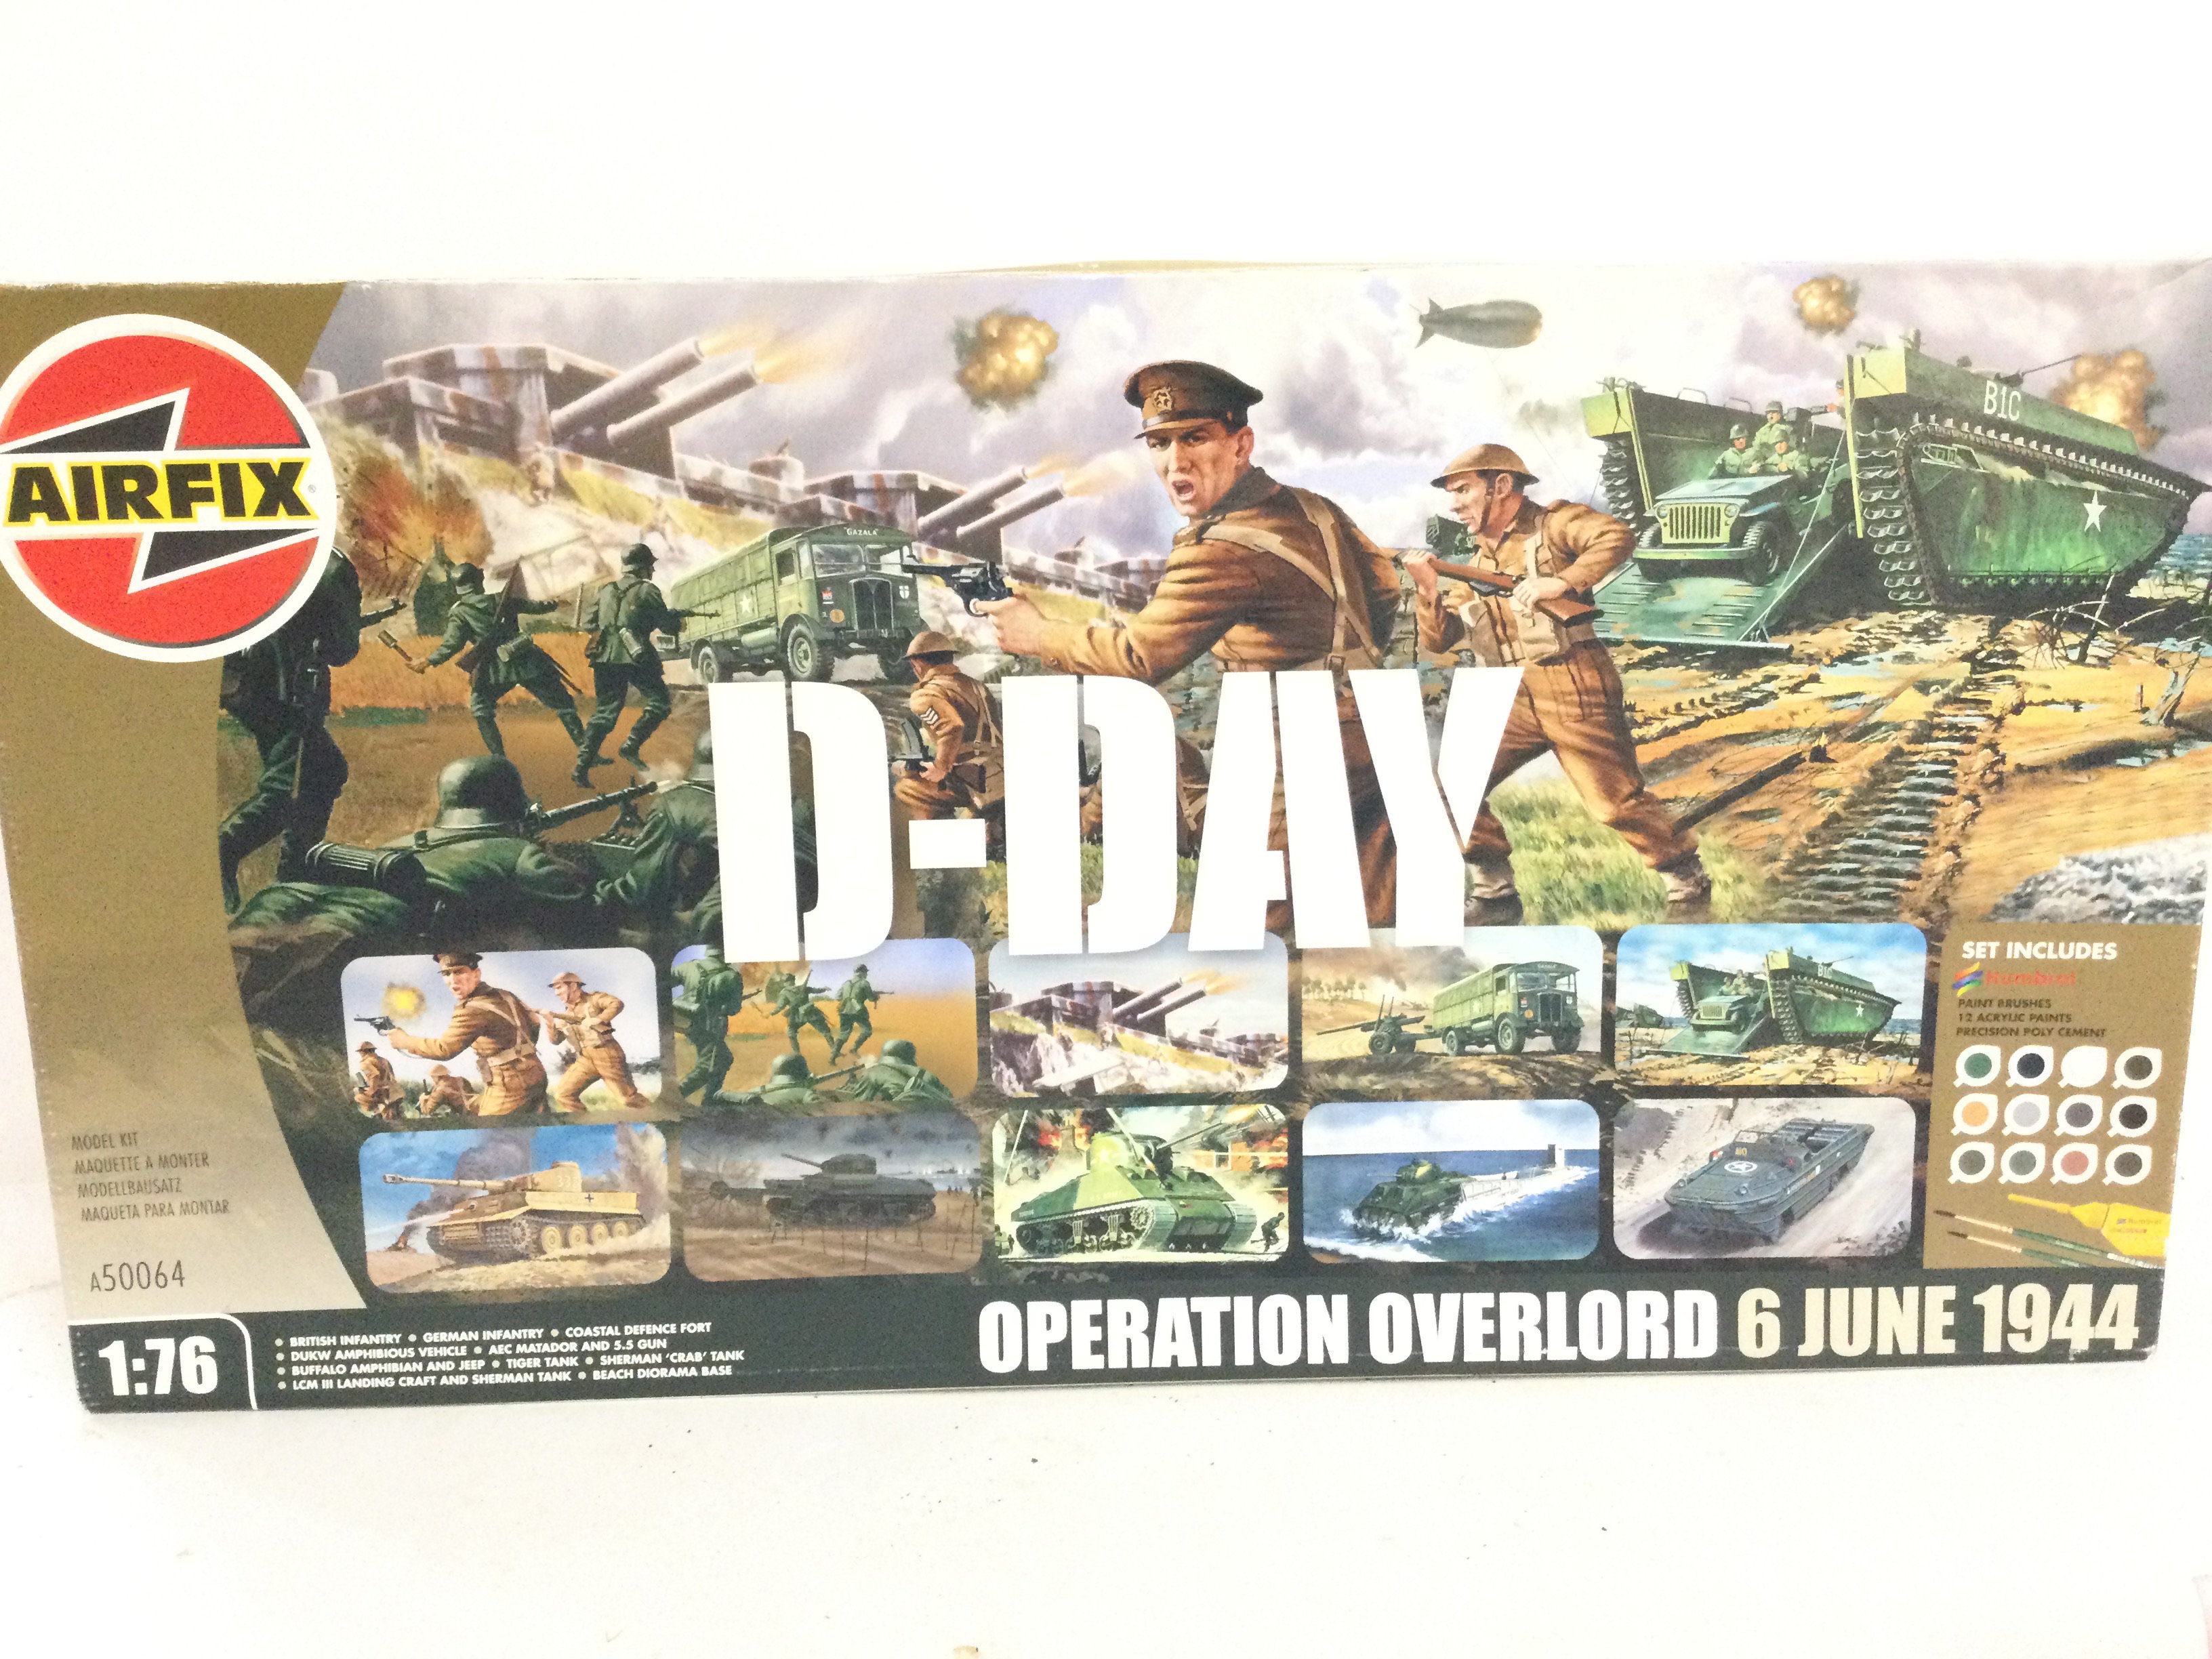 A Boxed Airfix D-Day Operation Overlord Model Kit #A50064.